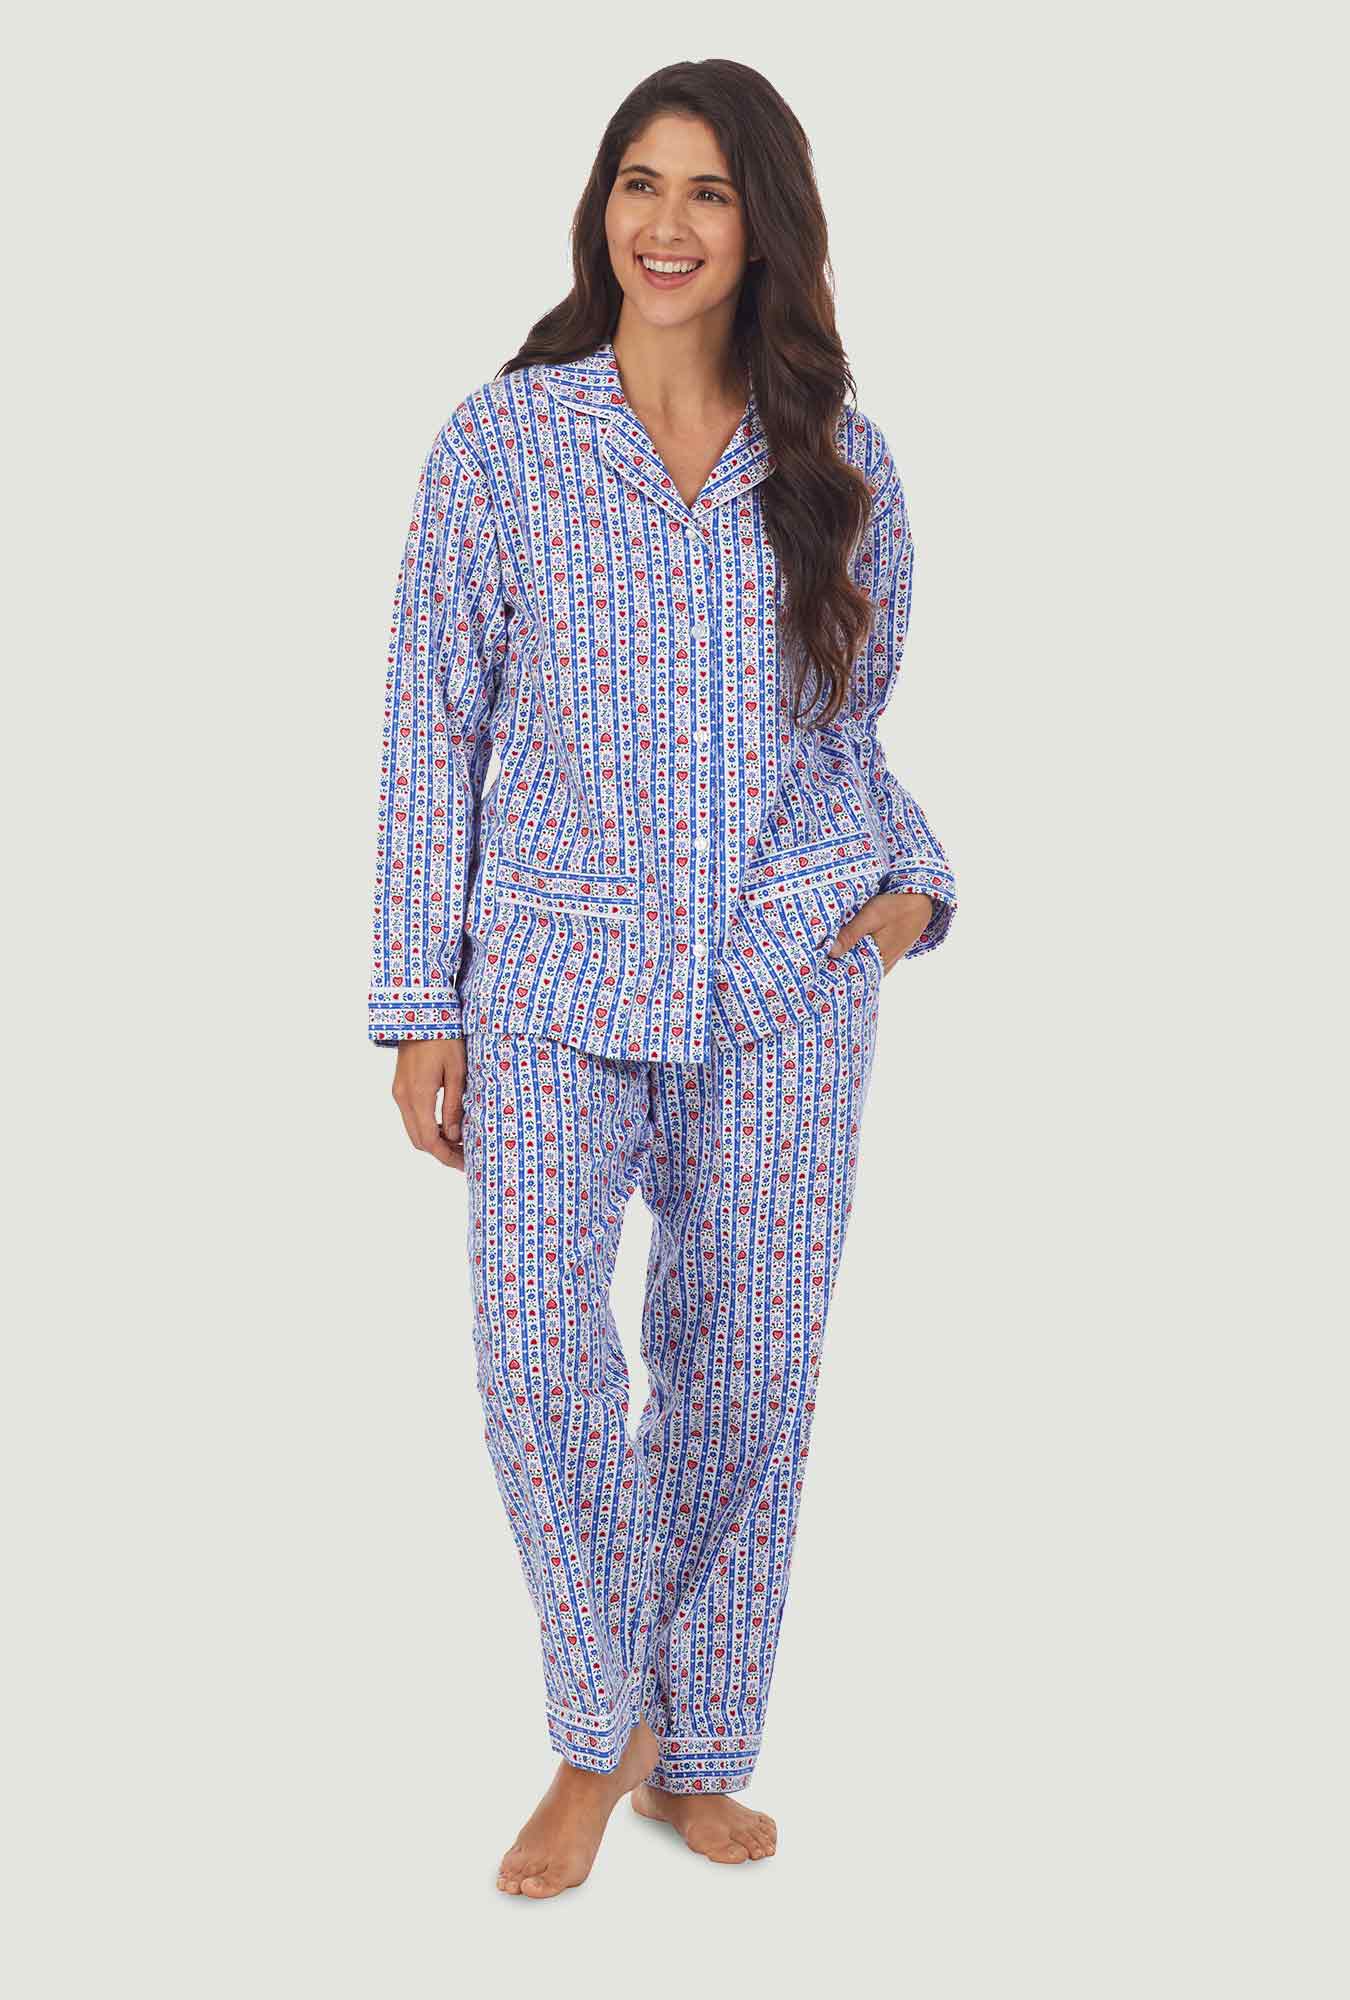 A lady wearing a blue long sleeve flannel pajama with tyrolean stripe pattern.